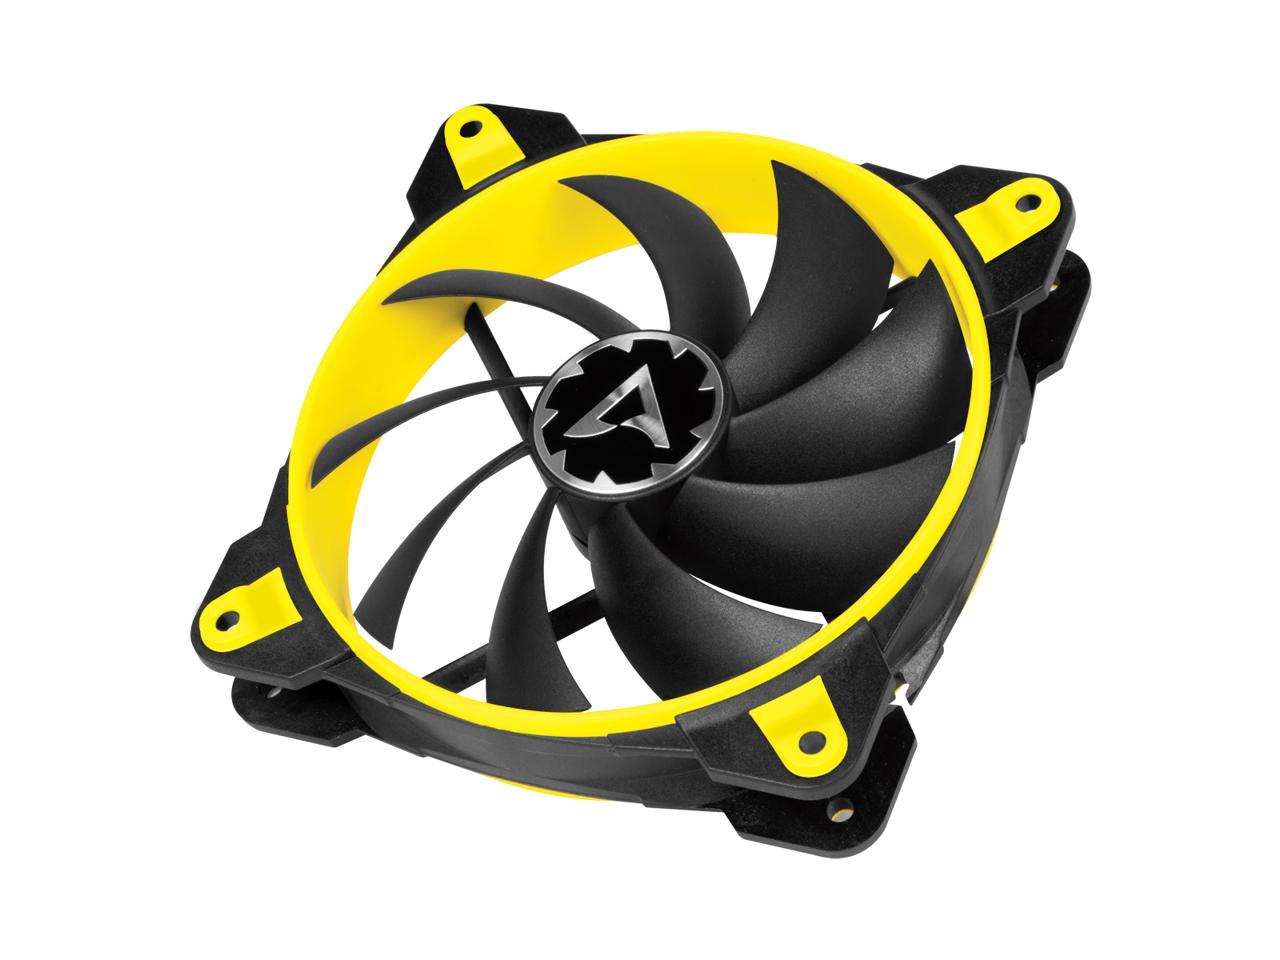 ARCTIC BioniX F140 - Gaming Fan with PWM PST I Silent 3-Phase Motor I 200 to 1800 RPM - Yellow